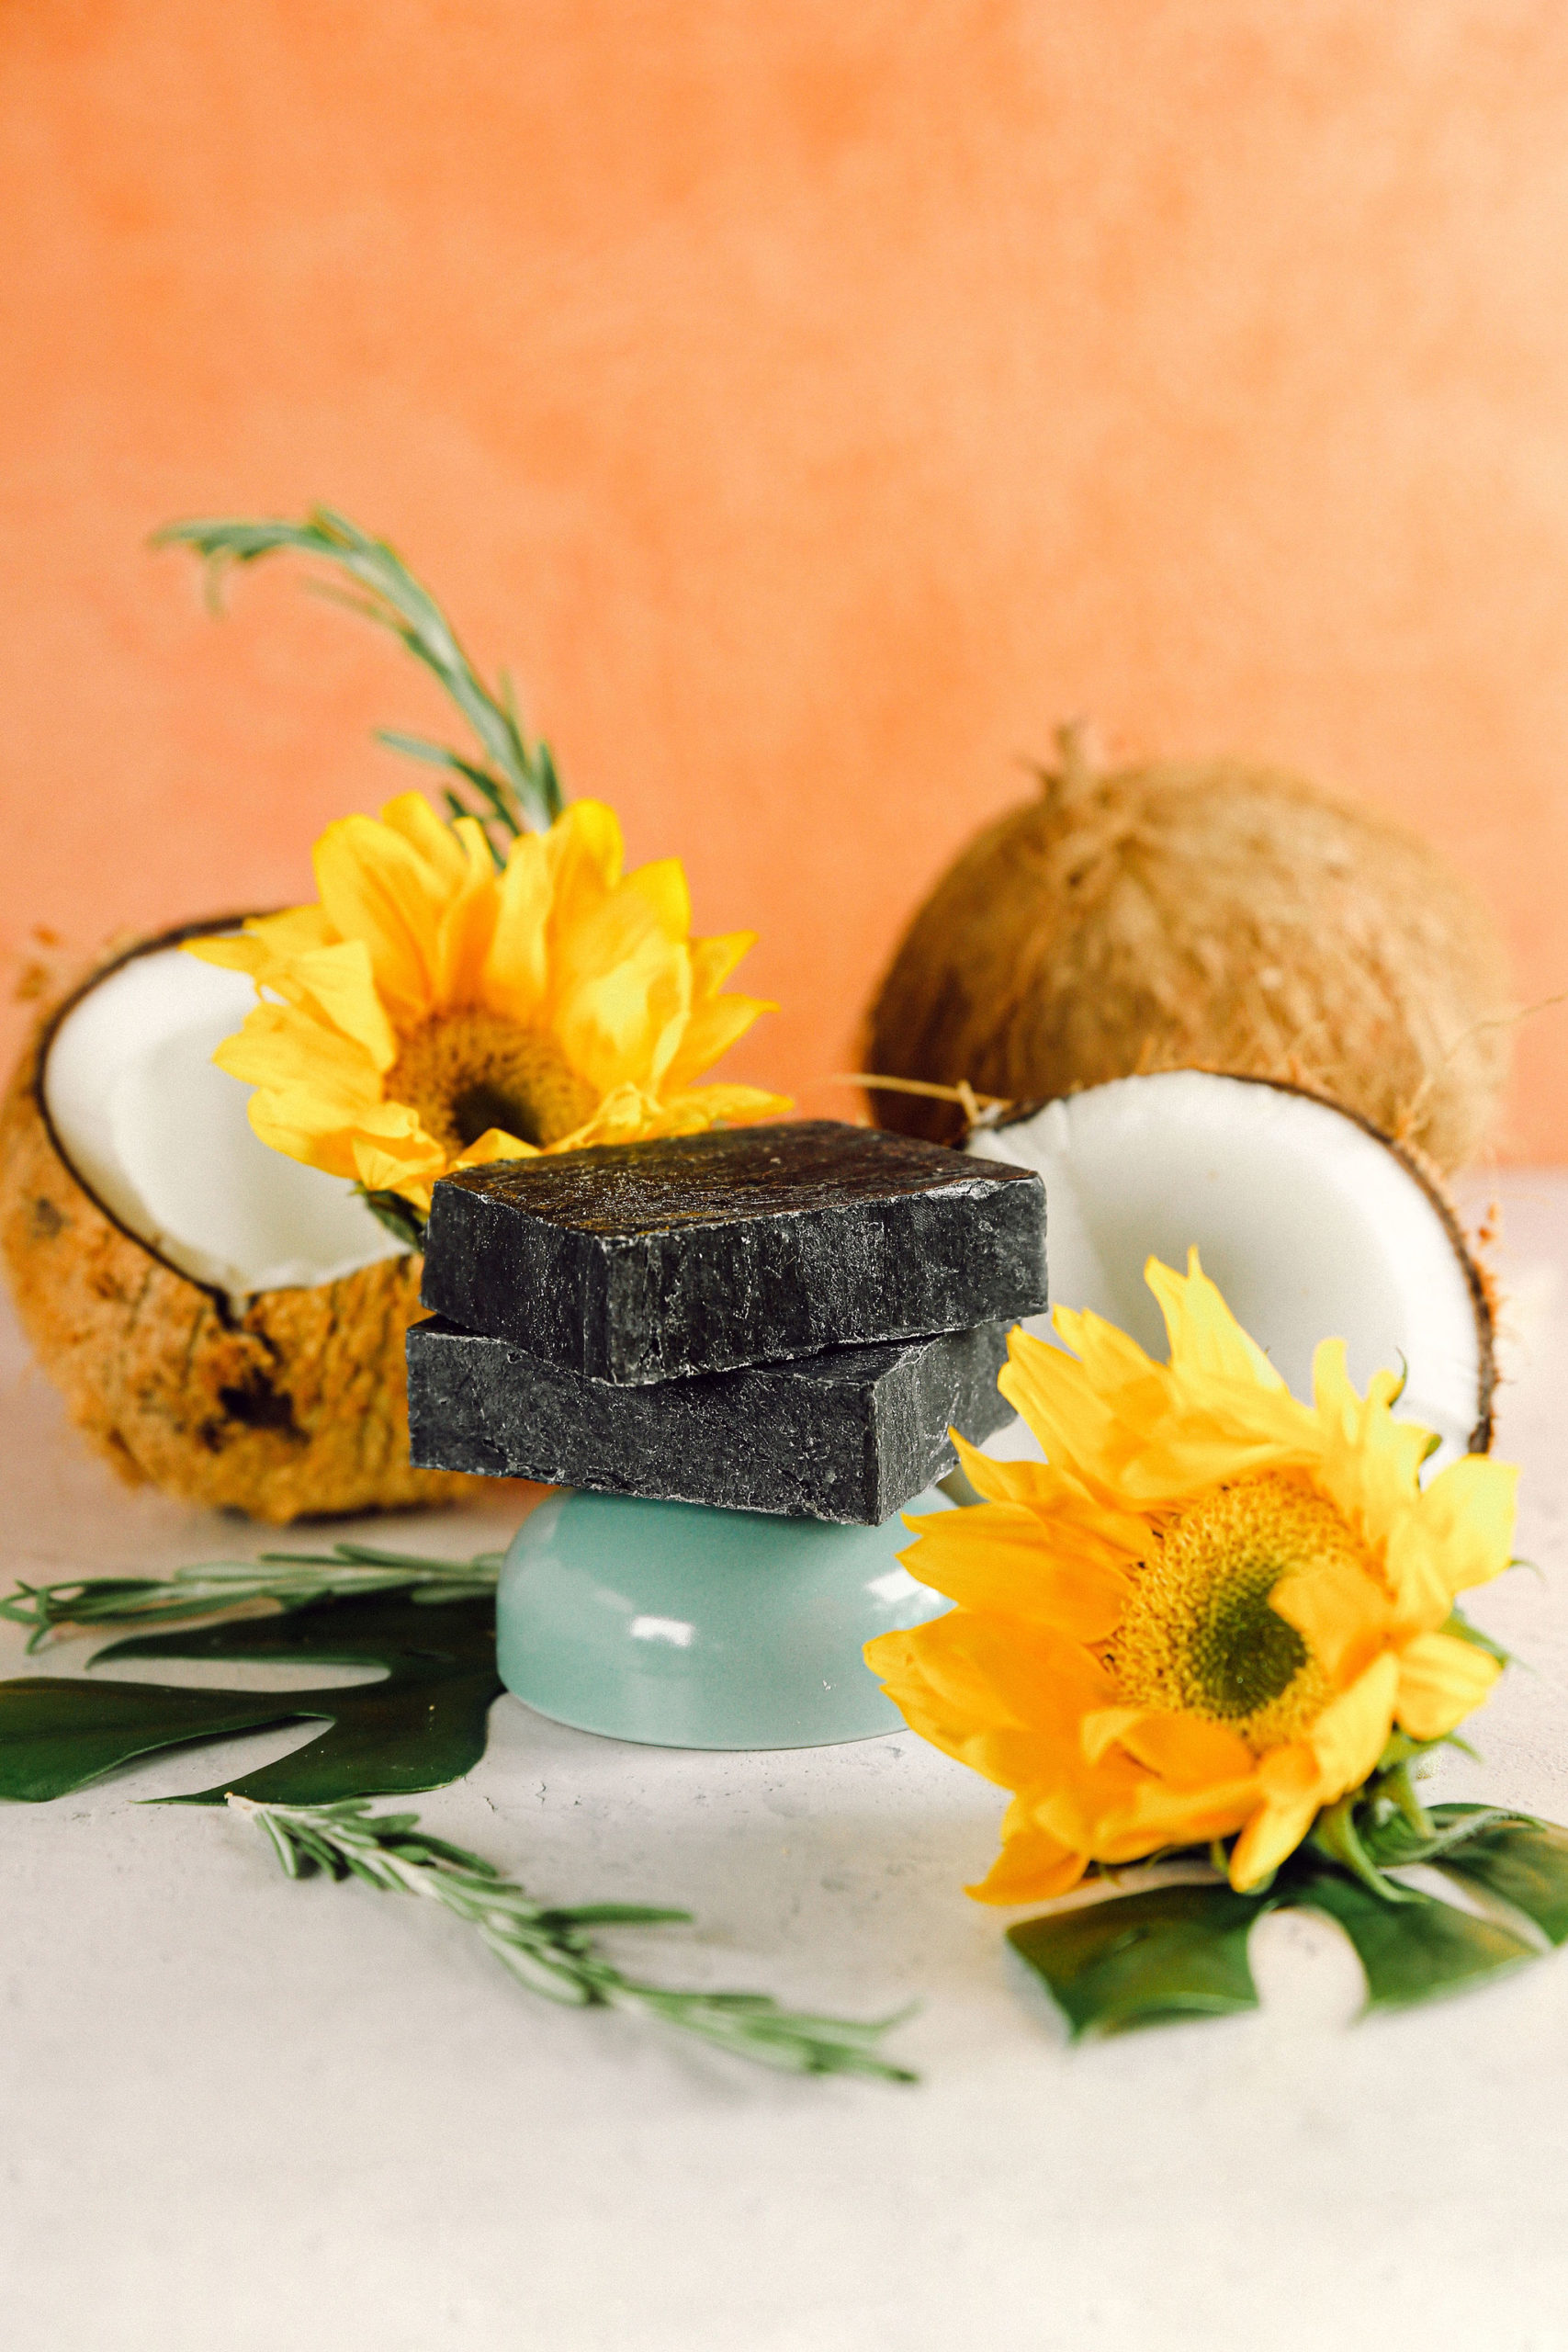 Skincare photography branding product photographer charcoal soap etsy small business coconut flat lay prop stylist branding photographer sunflower